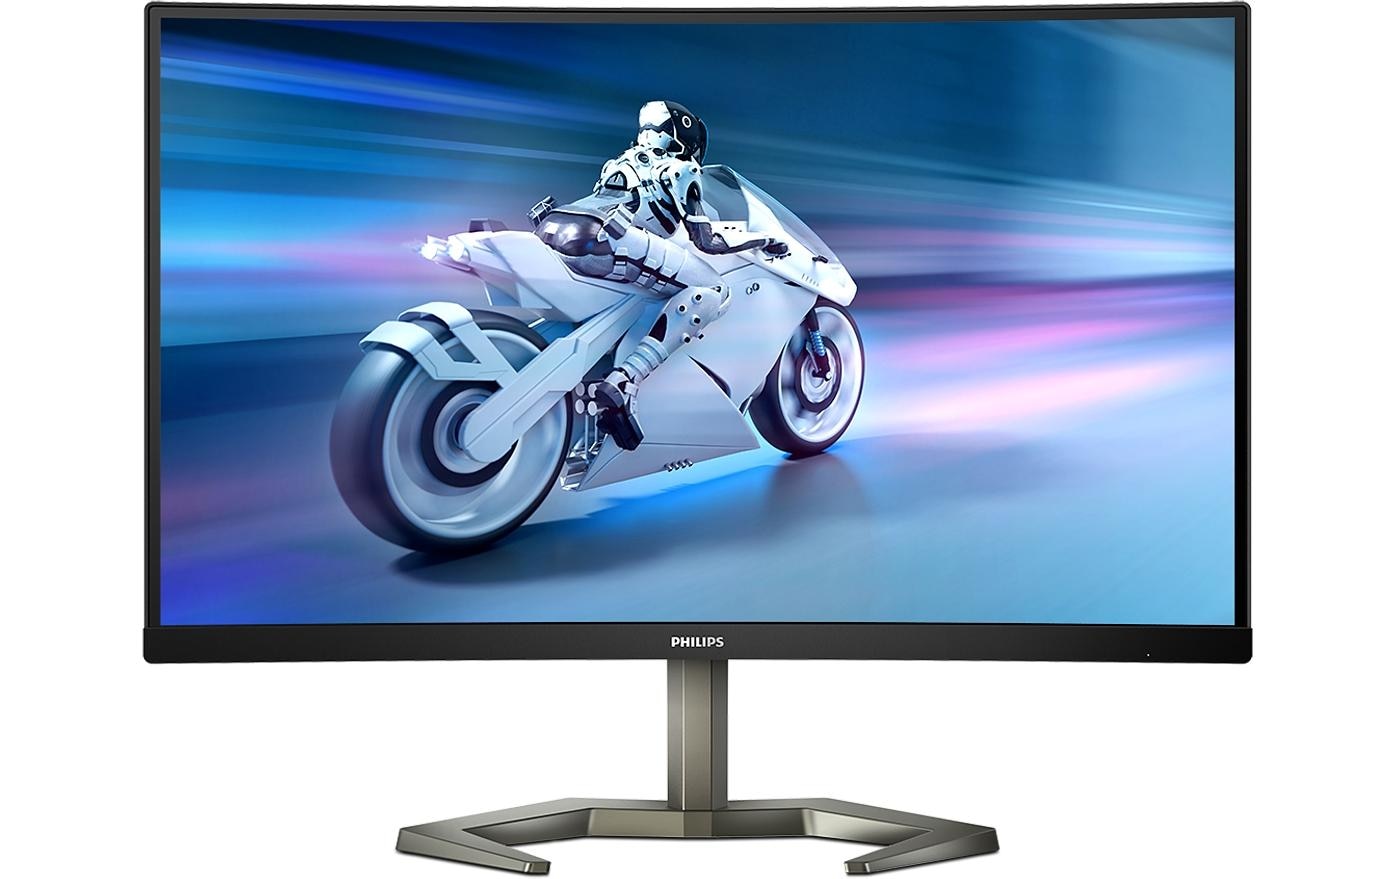 Philips Gaming-Monitor, 68,31 cm/27 Zoll, 1920 x 1080 px, Full HD, 4 ms Reaktionszeit, 240 Hz